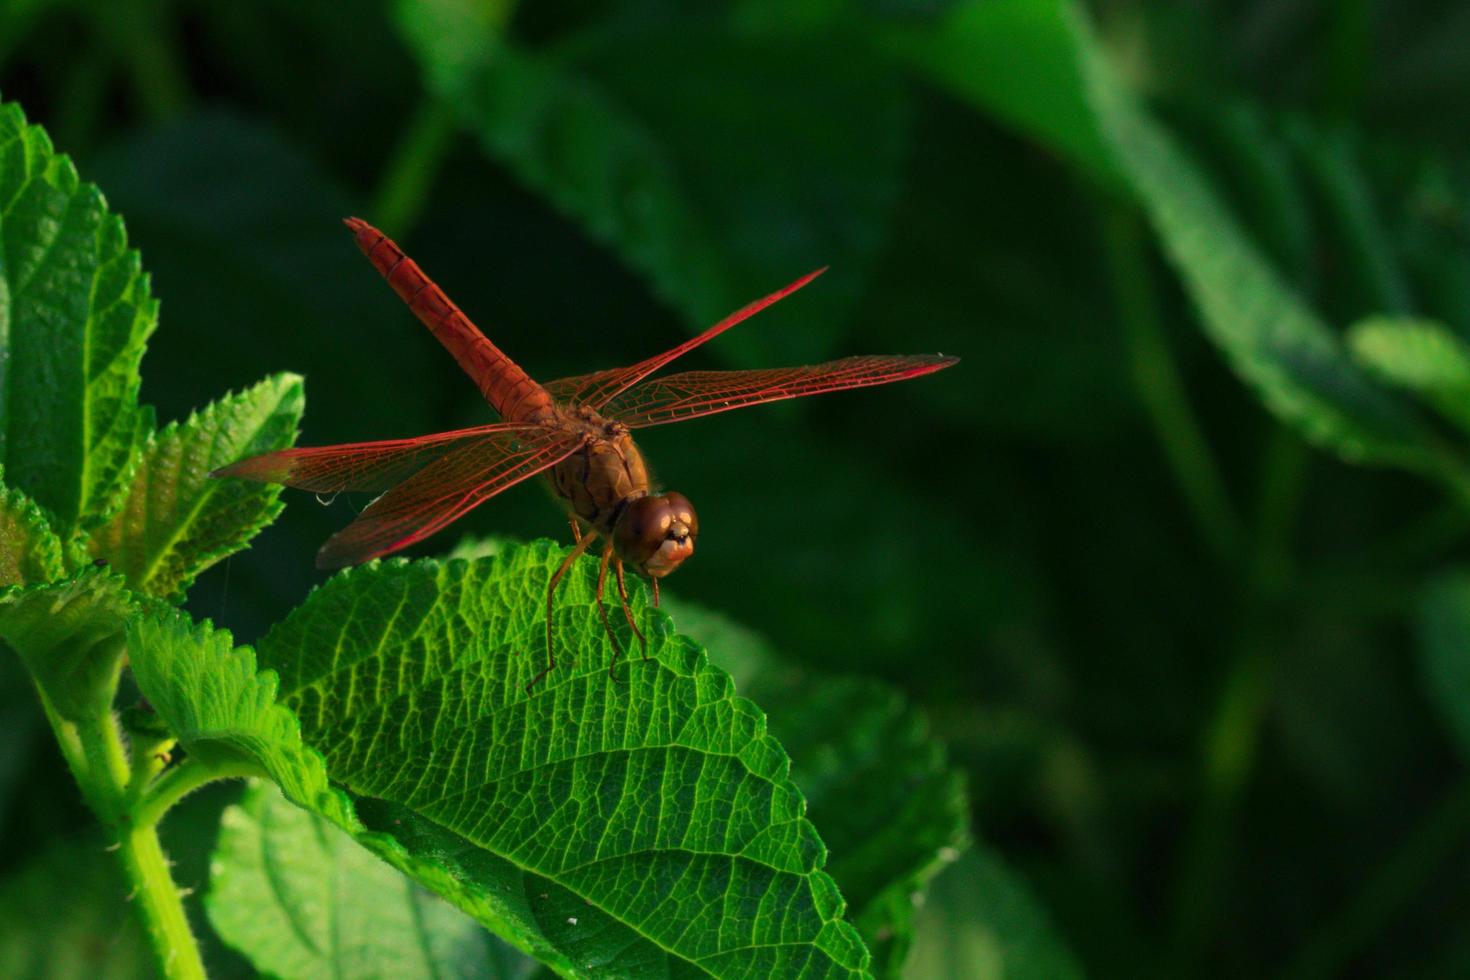 Beautiful red dragonfly show wings detail on a green leaf as natural background on sunshine day. Insect animal in nature. Closeup red dragonfly. Water quality indicator. Memorial concept. Save world. photo